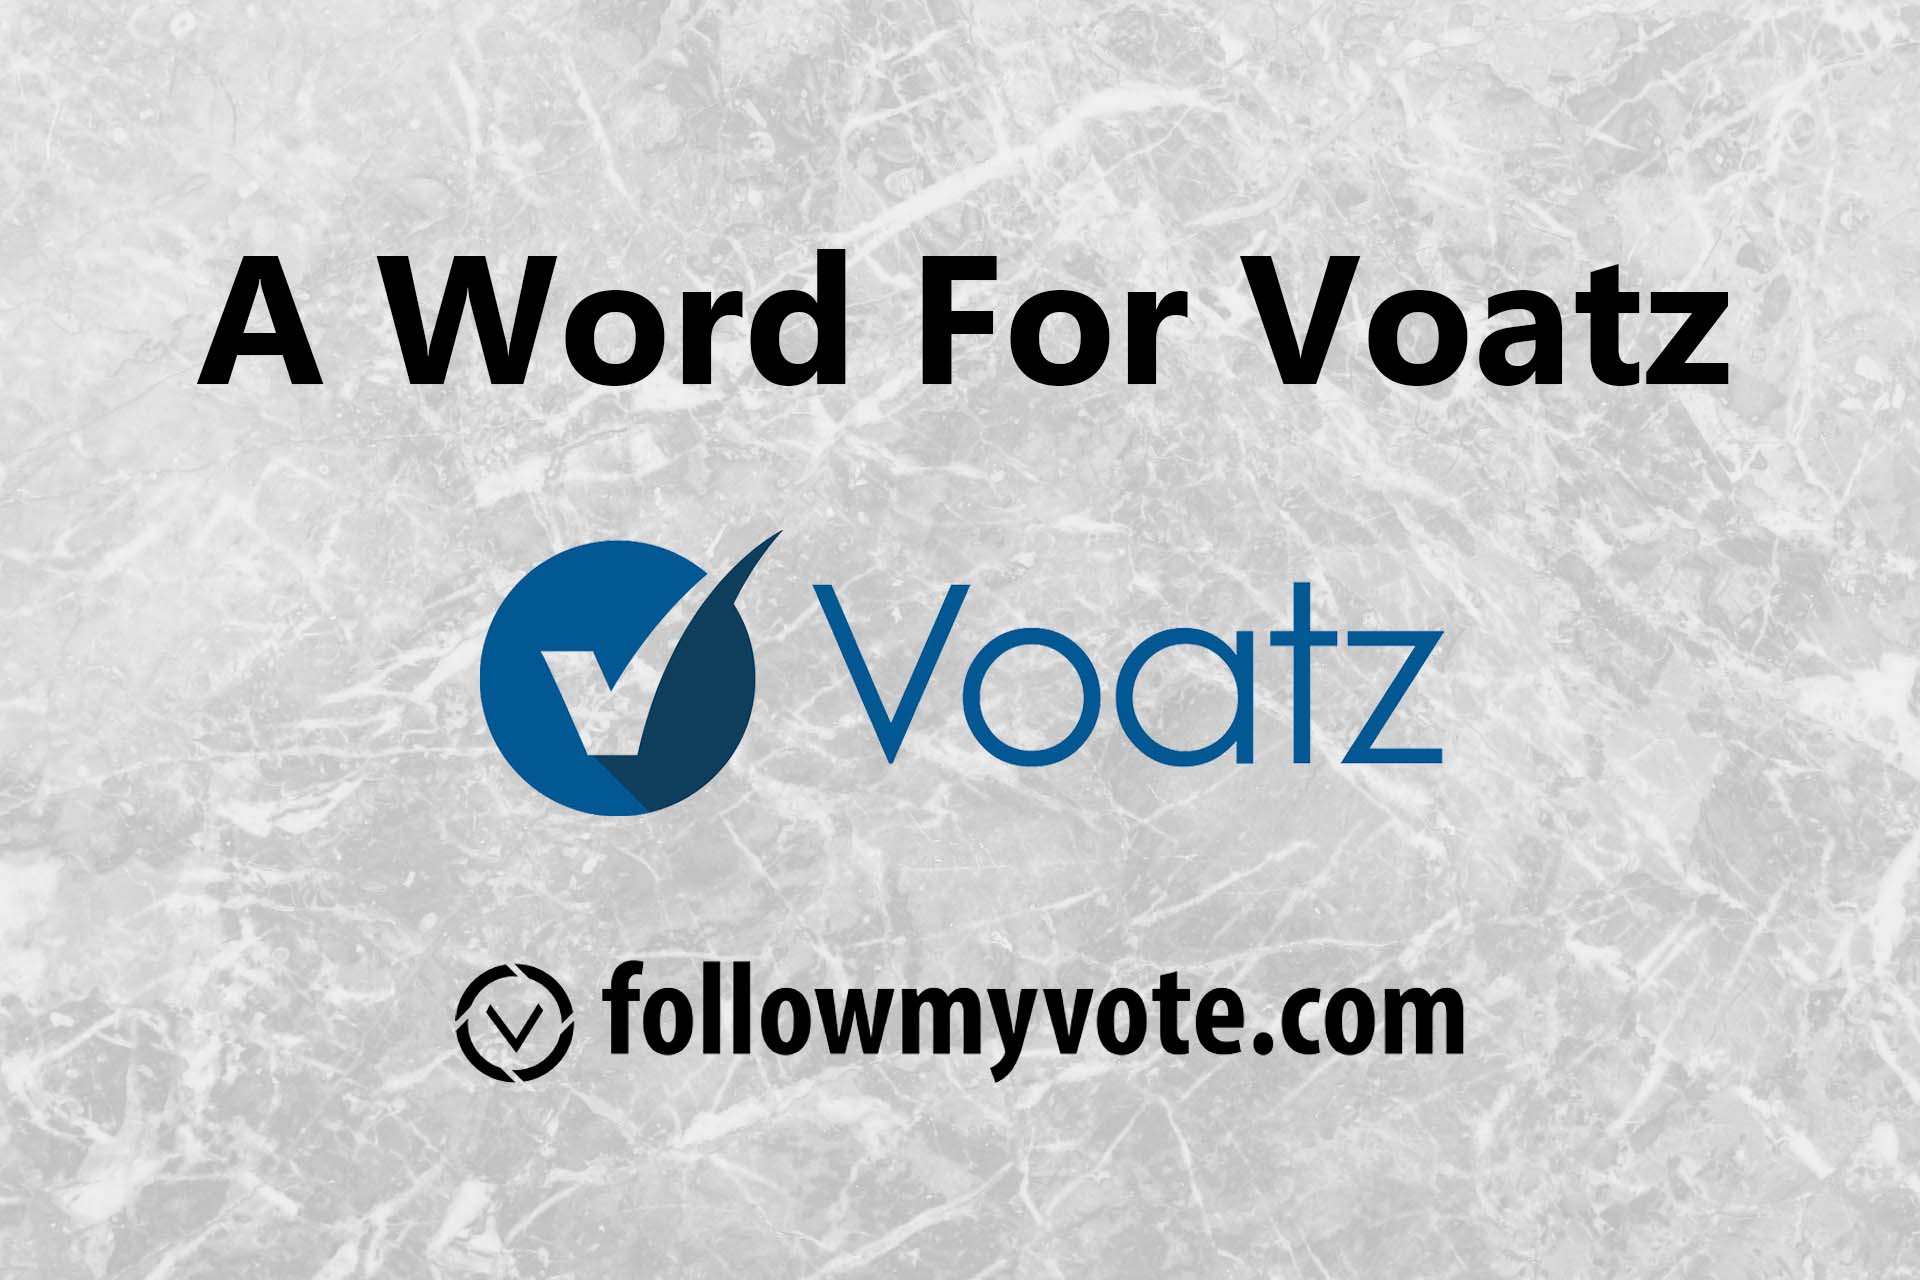 A Word For Voatz